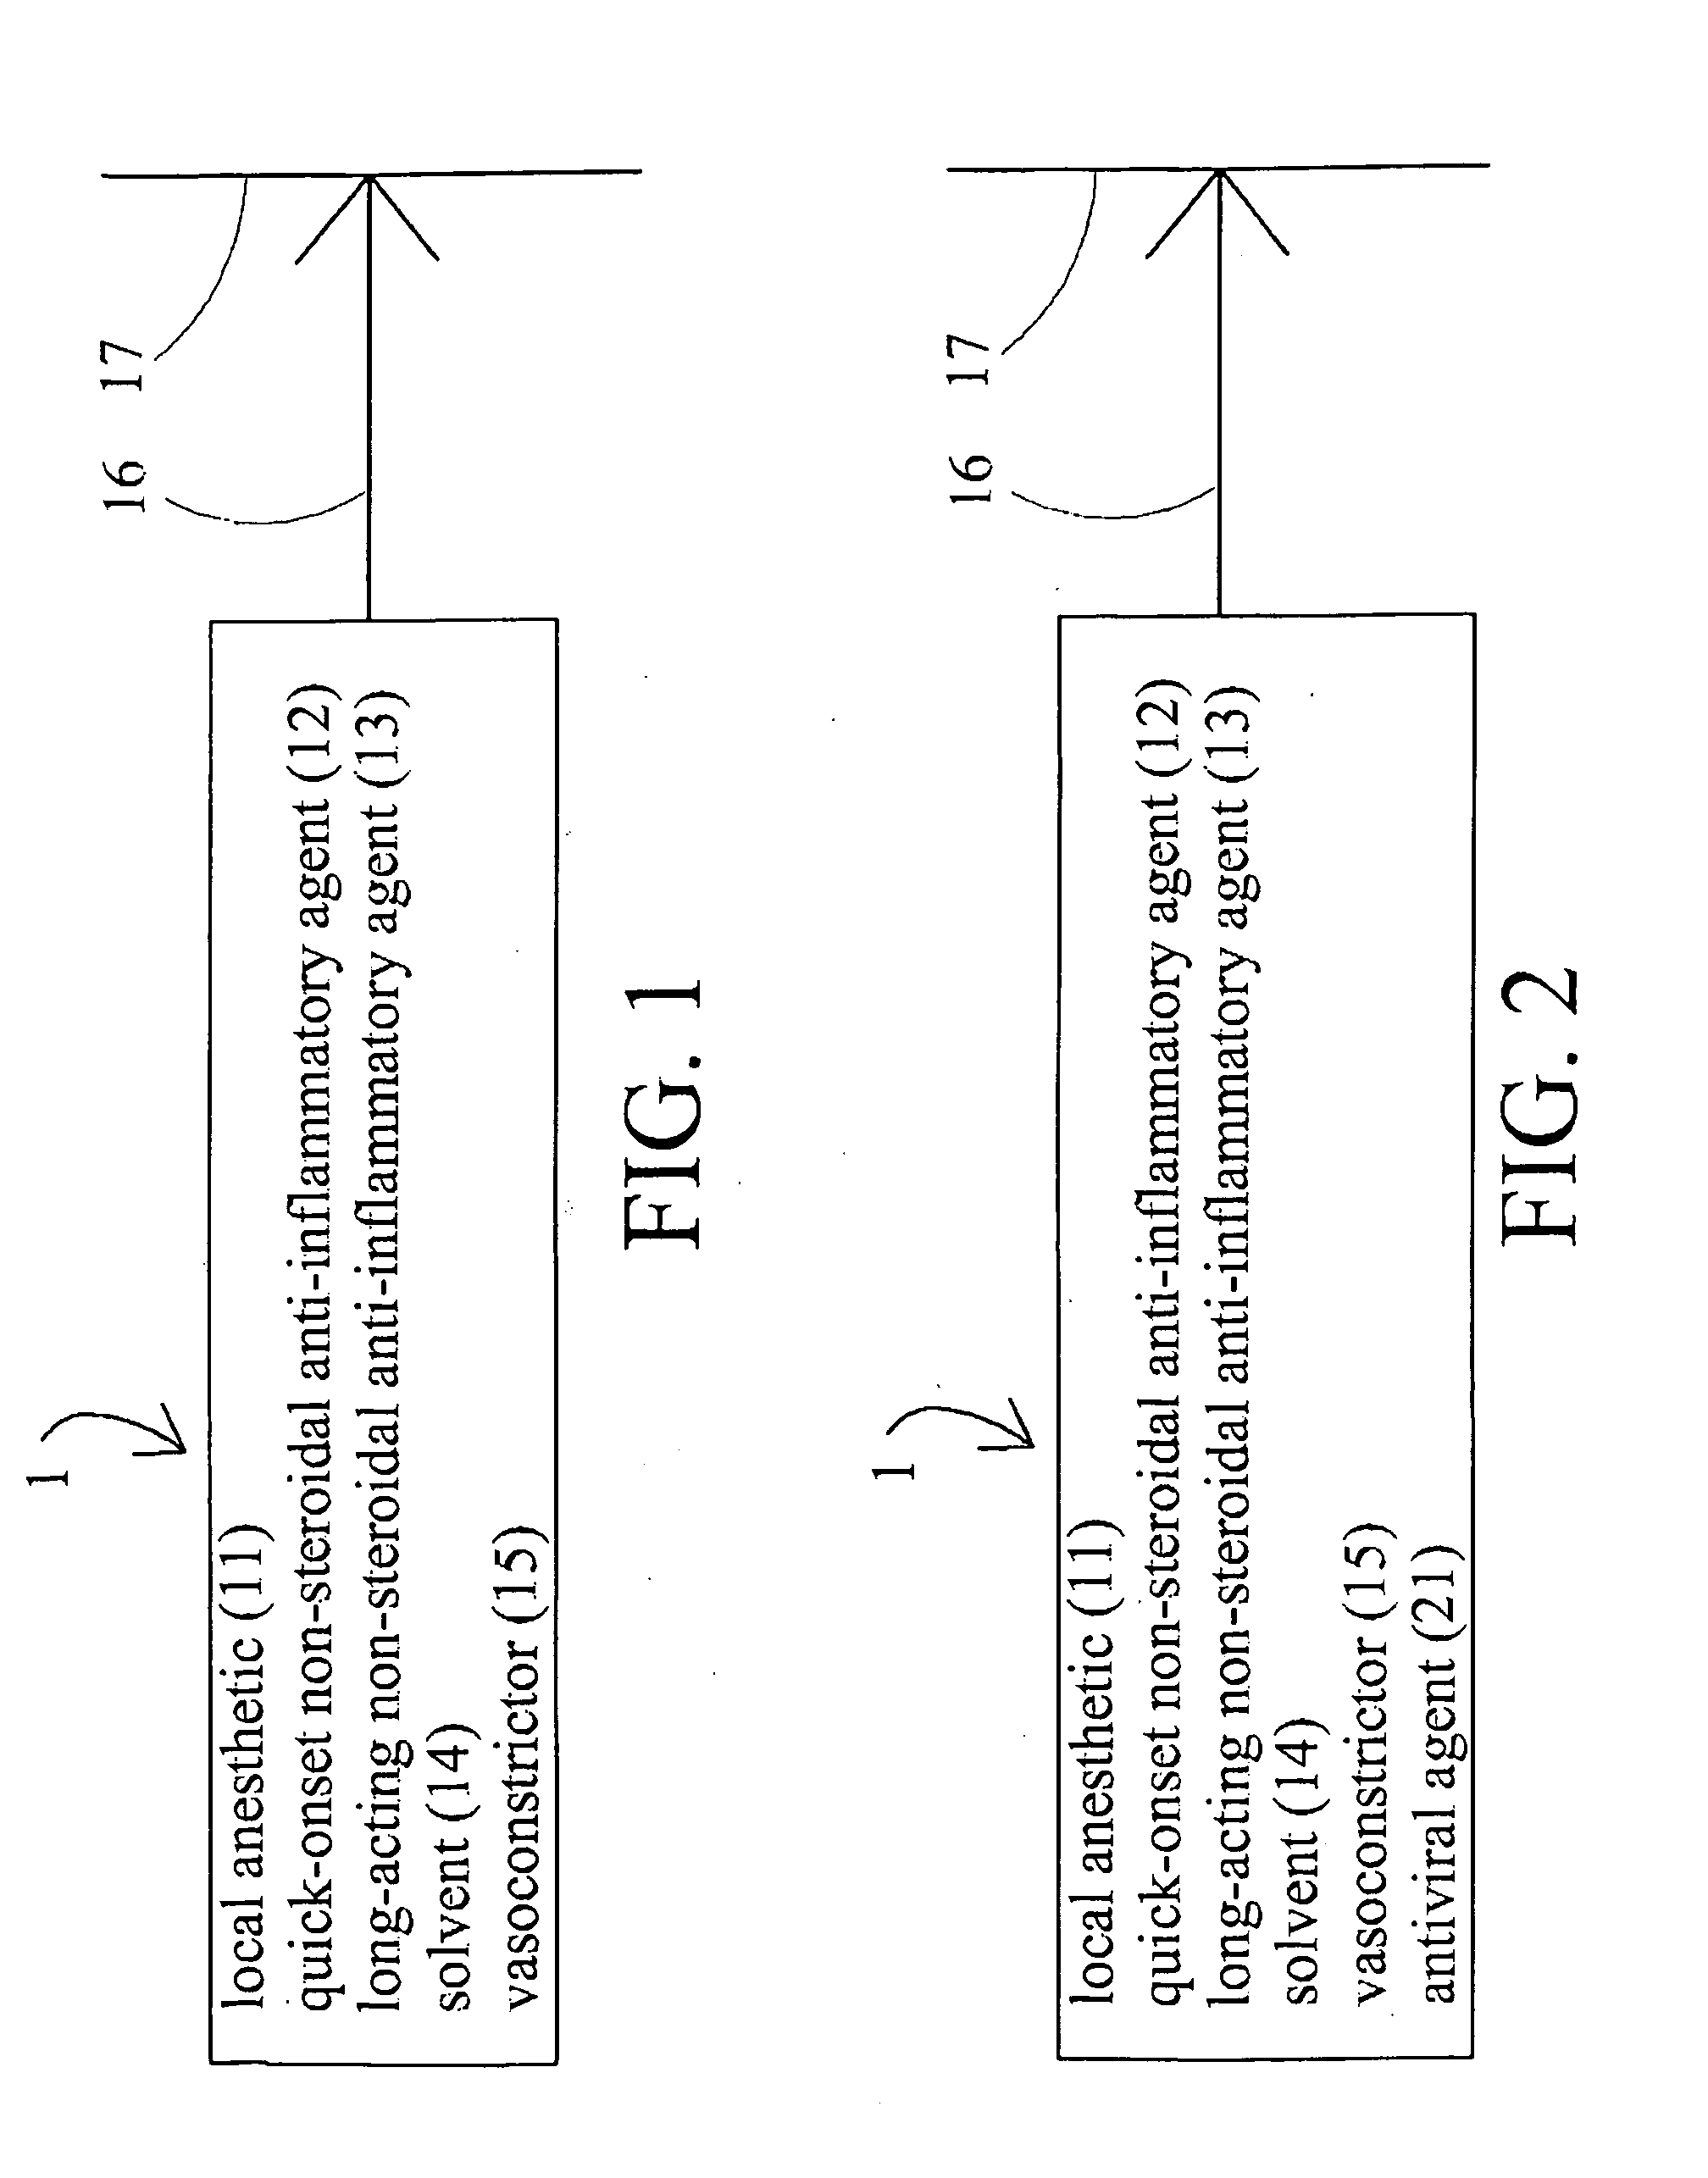 Topical Preparation and Method for Transdermal Delivery and Localization of Therapeutic Agents